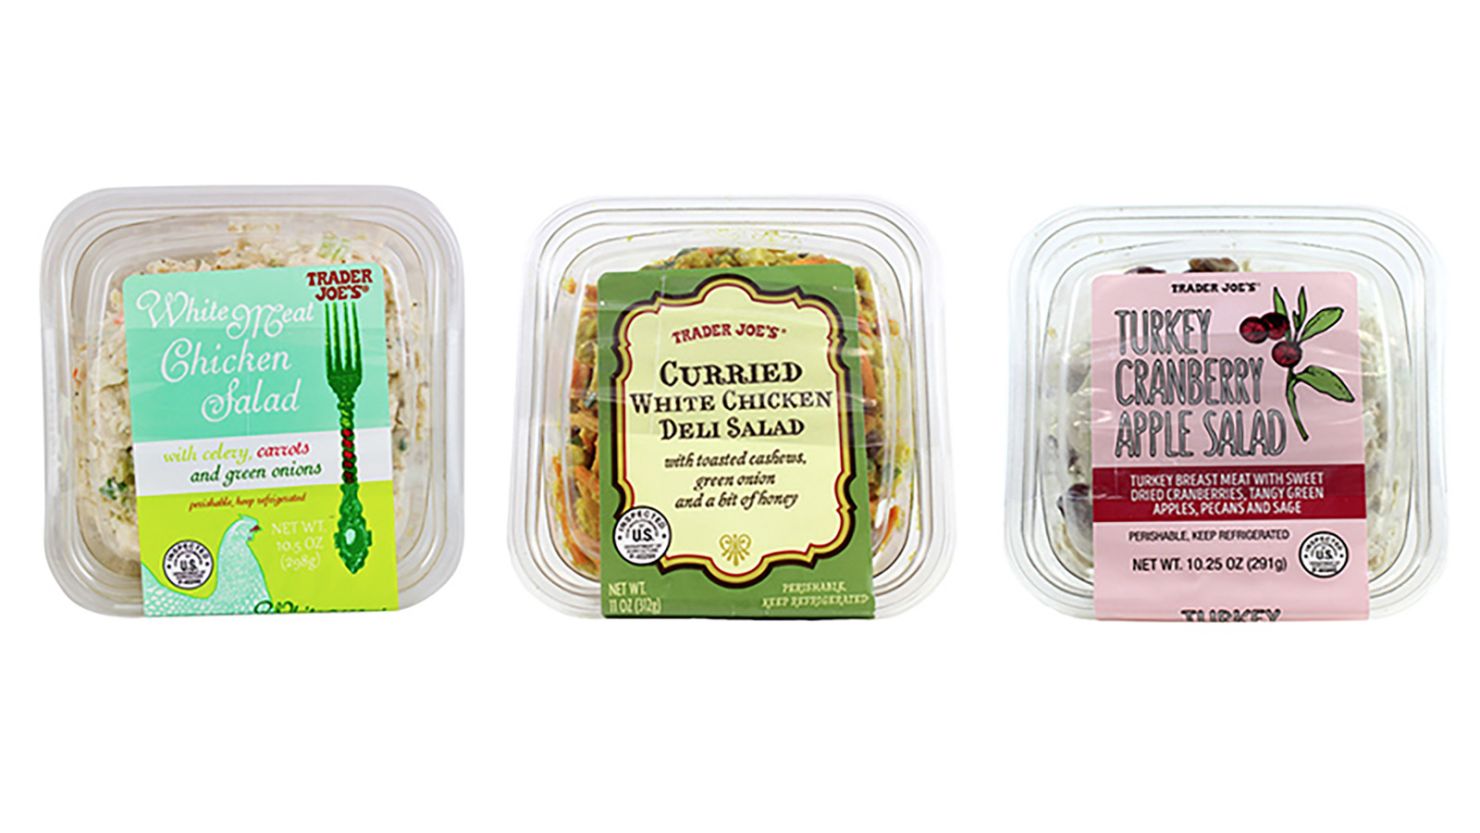 Examples of the recalled salads.